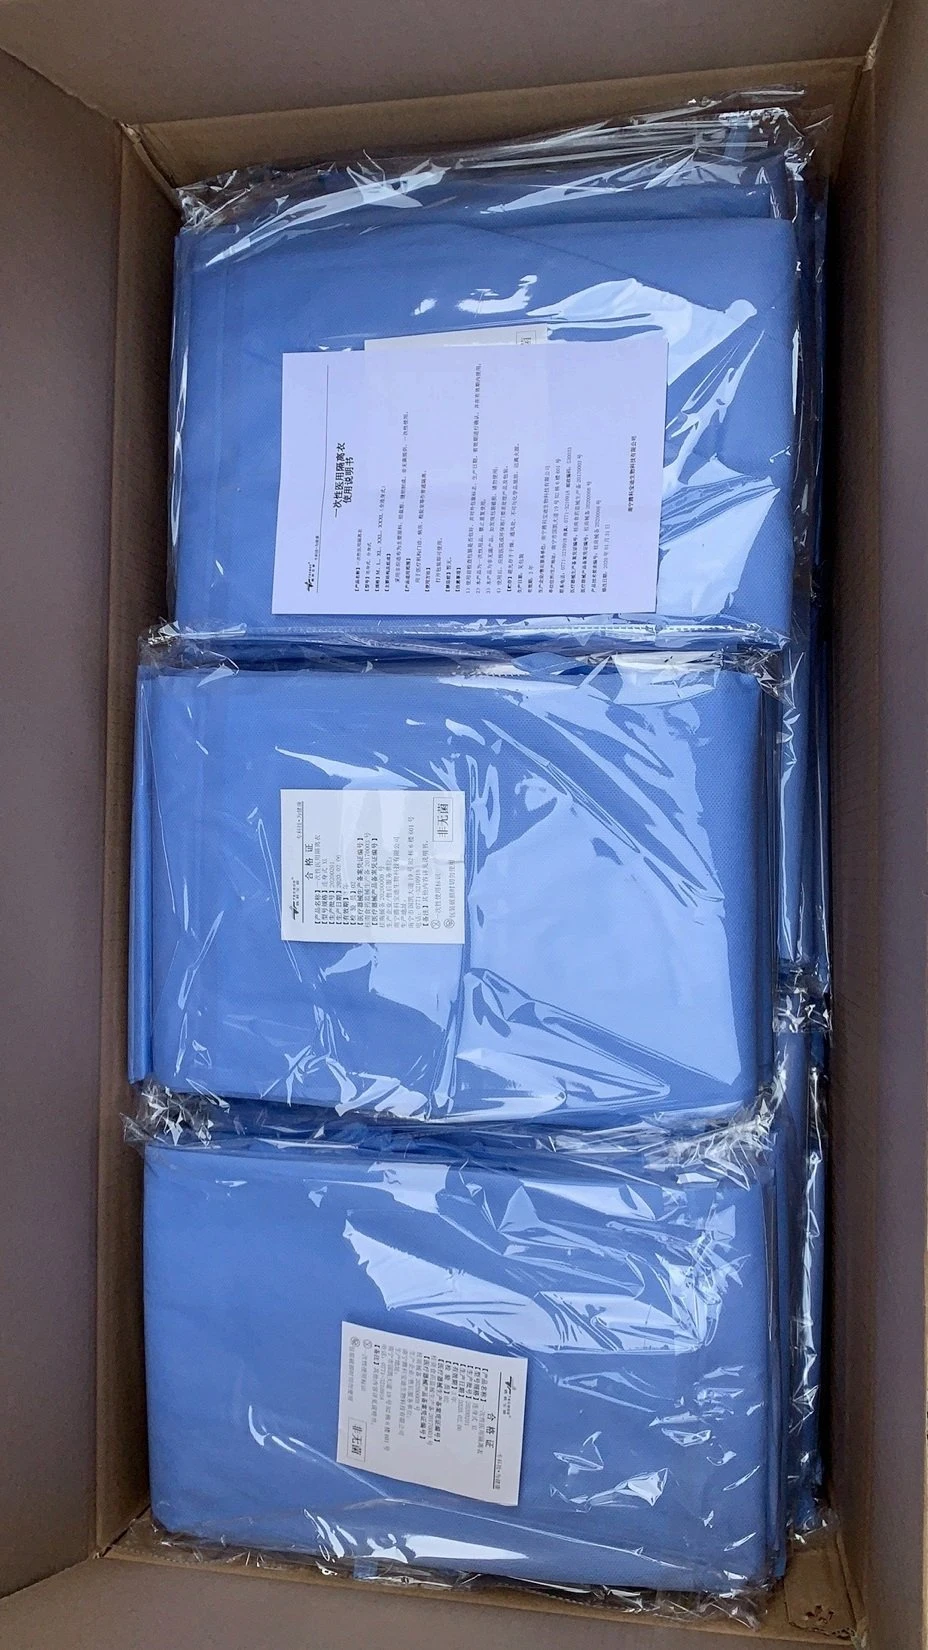 Isolation Gown Material 100% Polypropylene SMS Spunbond Nonwoven Fabric